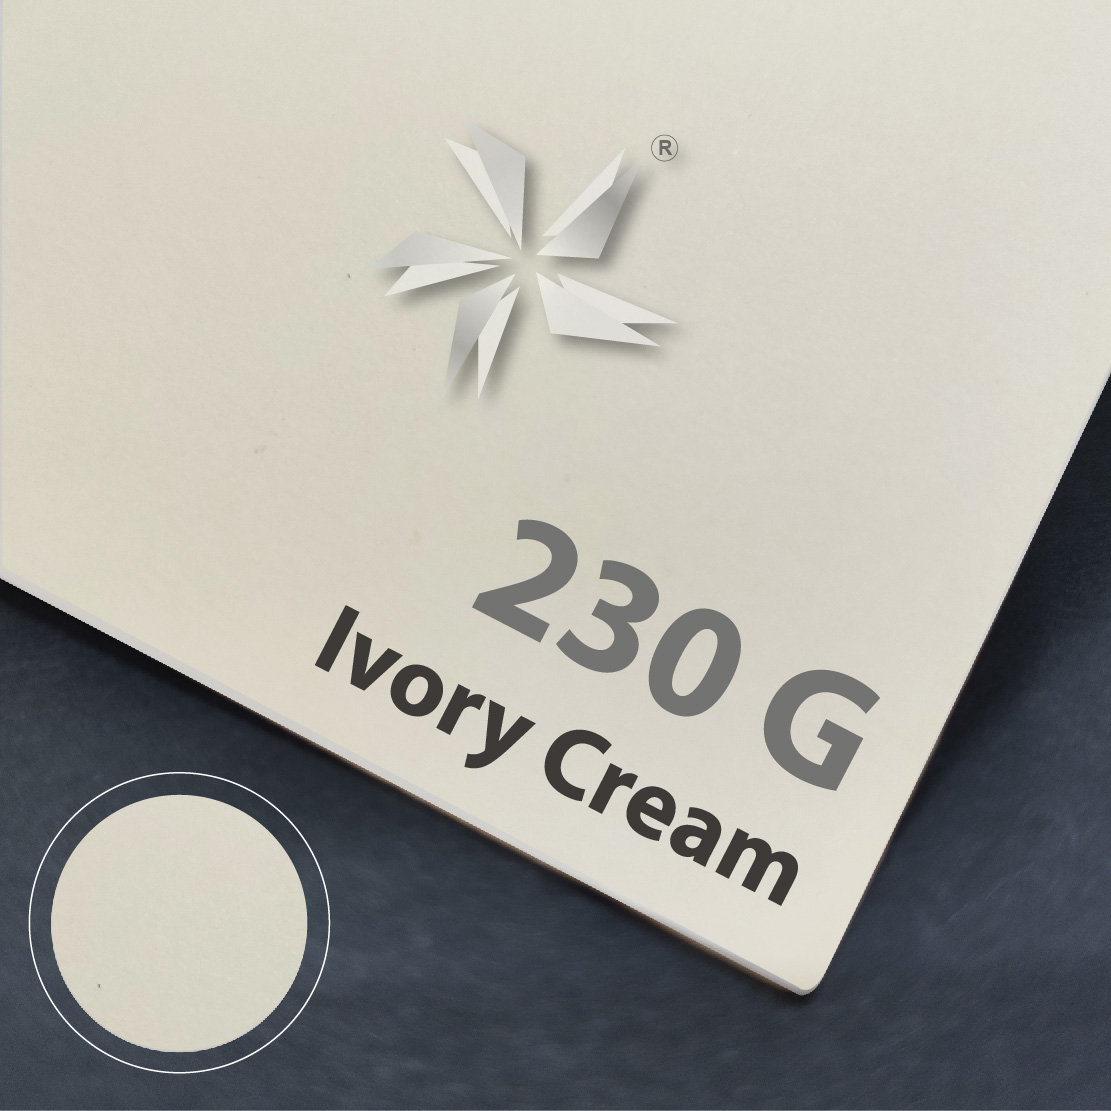 Cream Ivory Card 250g (Cream Color Smooth Surface)